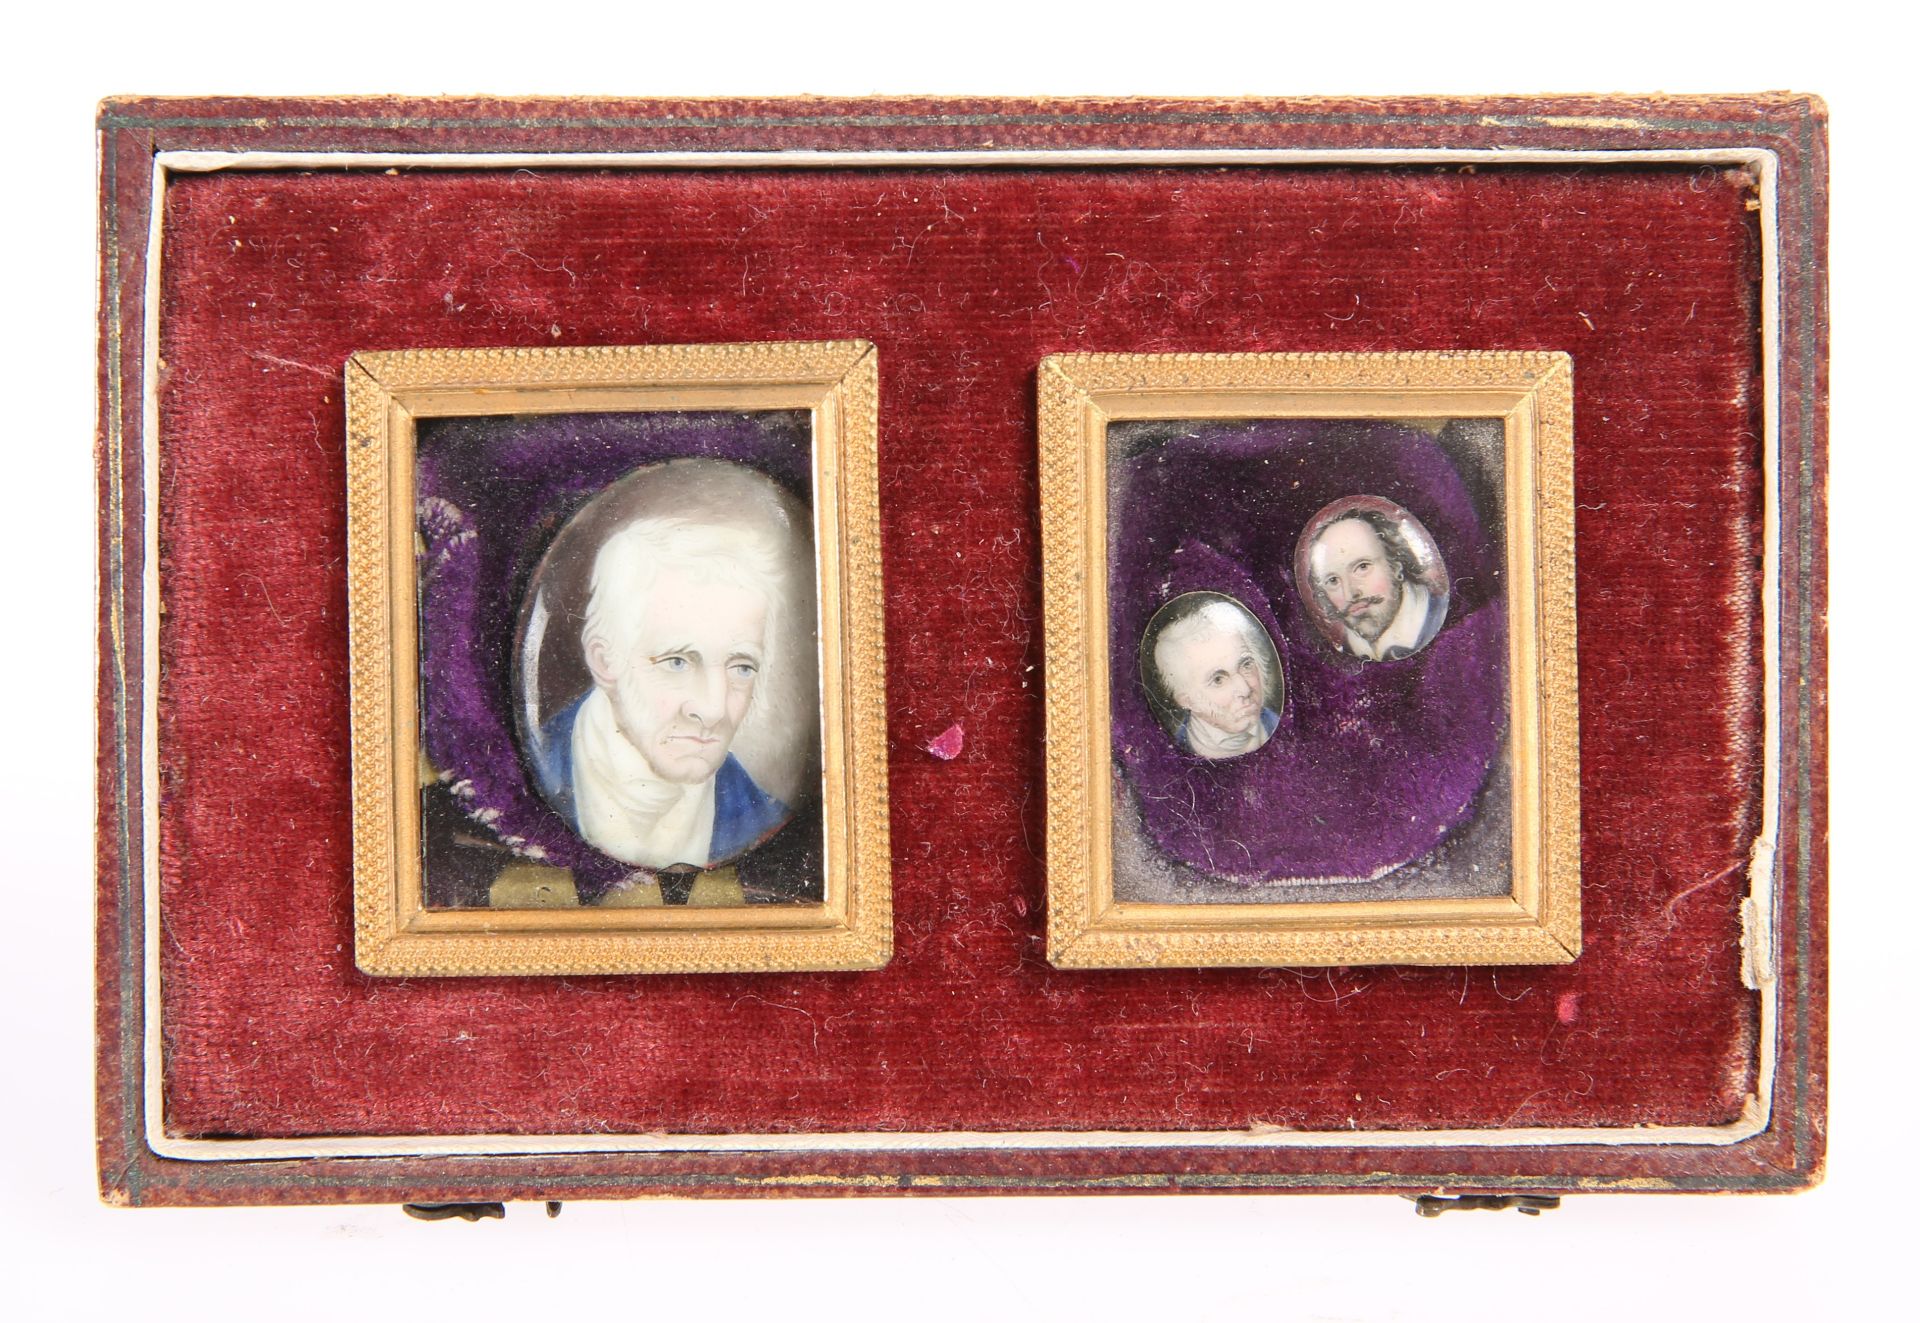 THREE 19TH CENTURY ENAMELLED PORTRAIT MINIATURES, the larger example depicting Wellington, inscribed